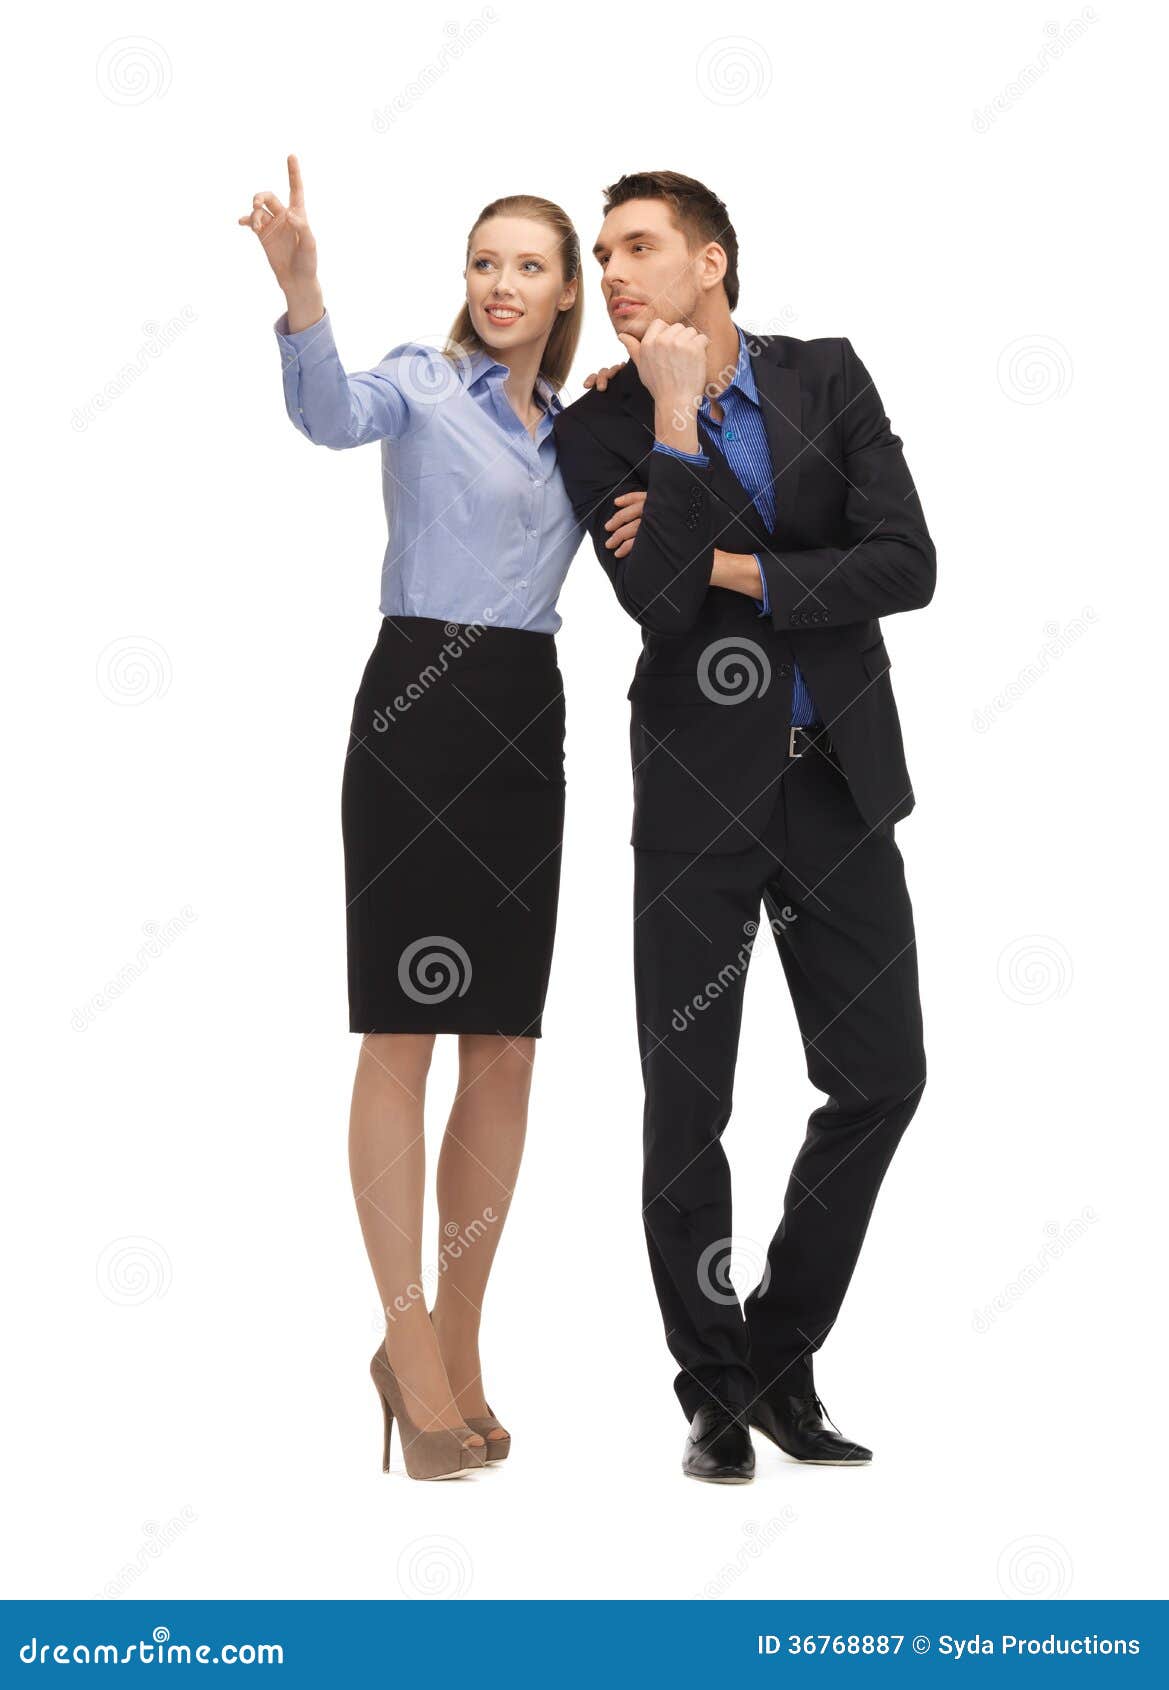 Men and women work. Мужская и женская работа. Business man and woman. Man and woman for working icon.